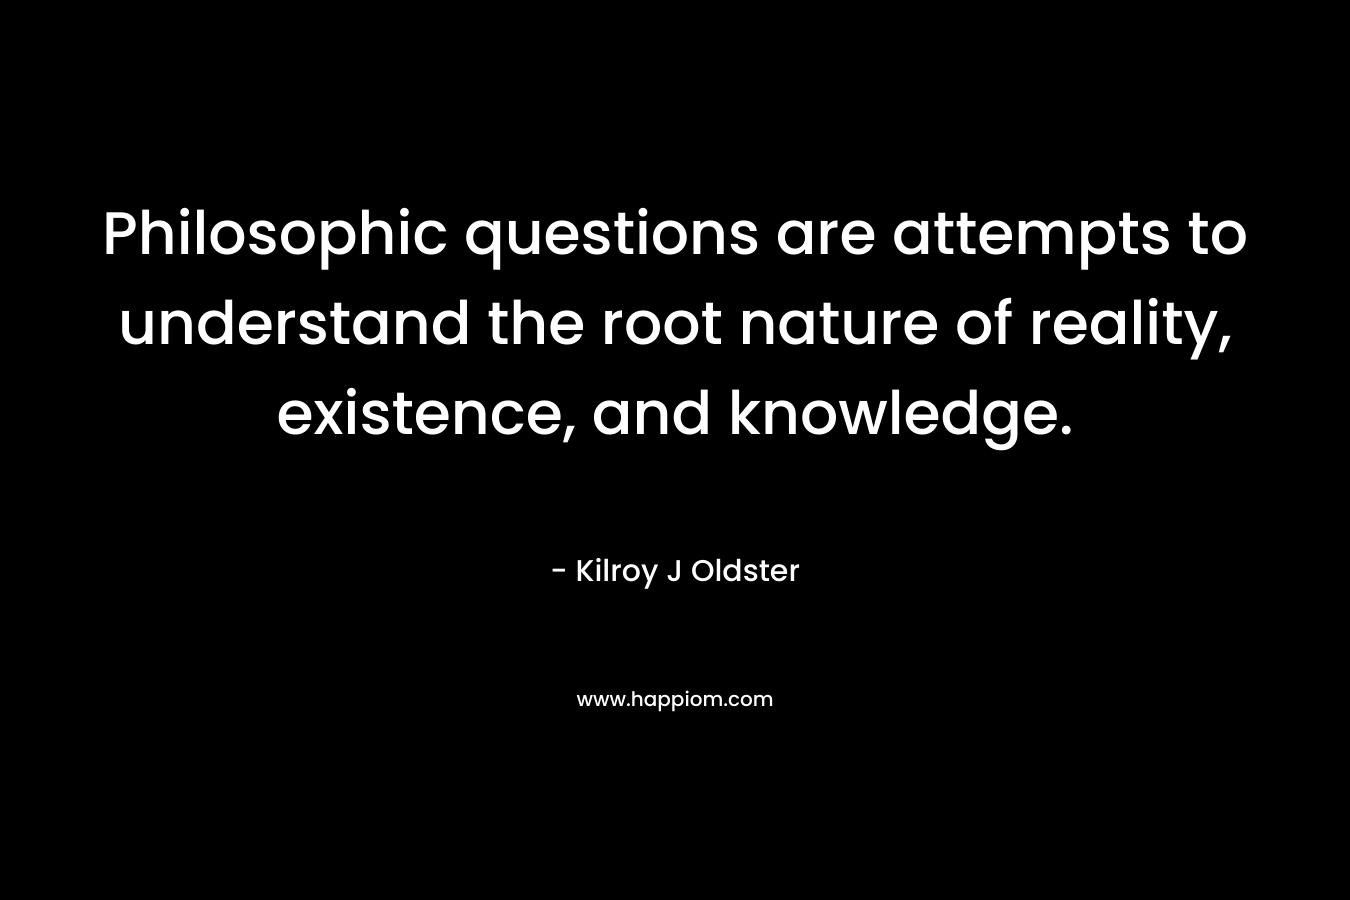 Philosophic questions are attempts to understand the root nature of reality, existence, and knowledge.